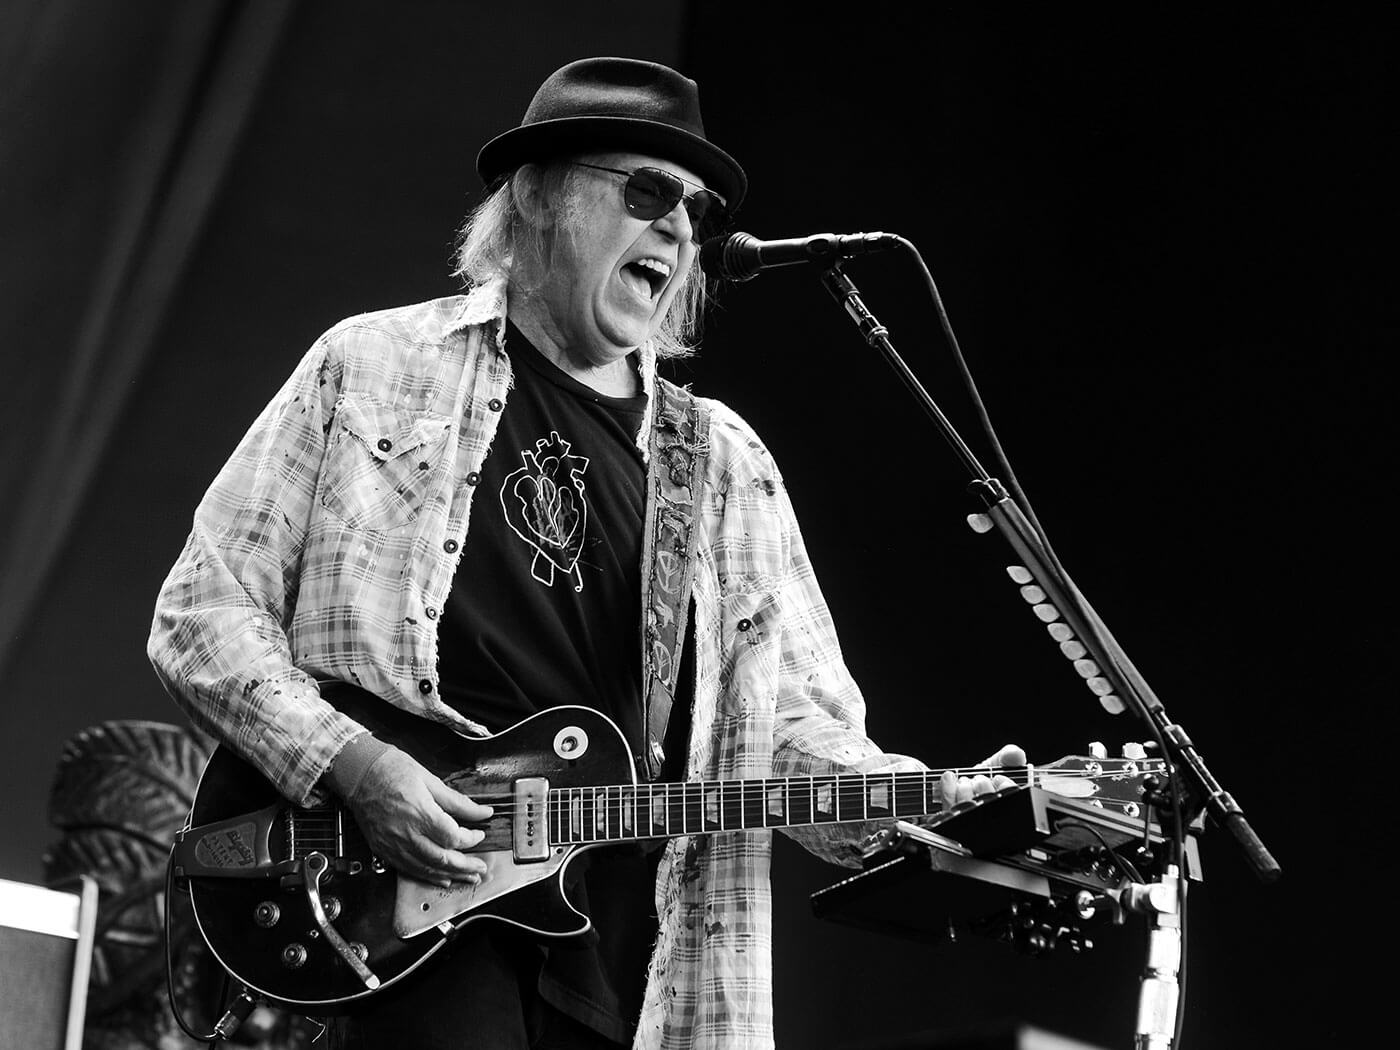 Neil Young will tour in 2020 after all, announcing plans to take Crazy Horse on a US tour